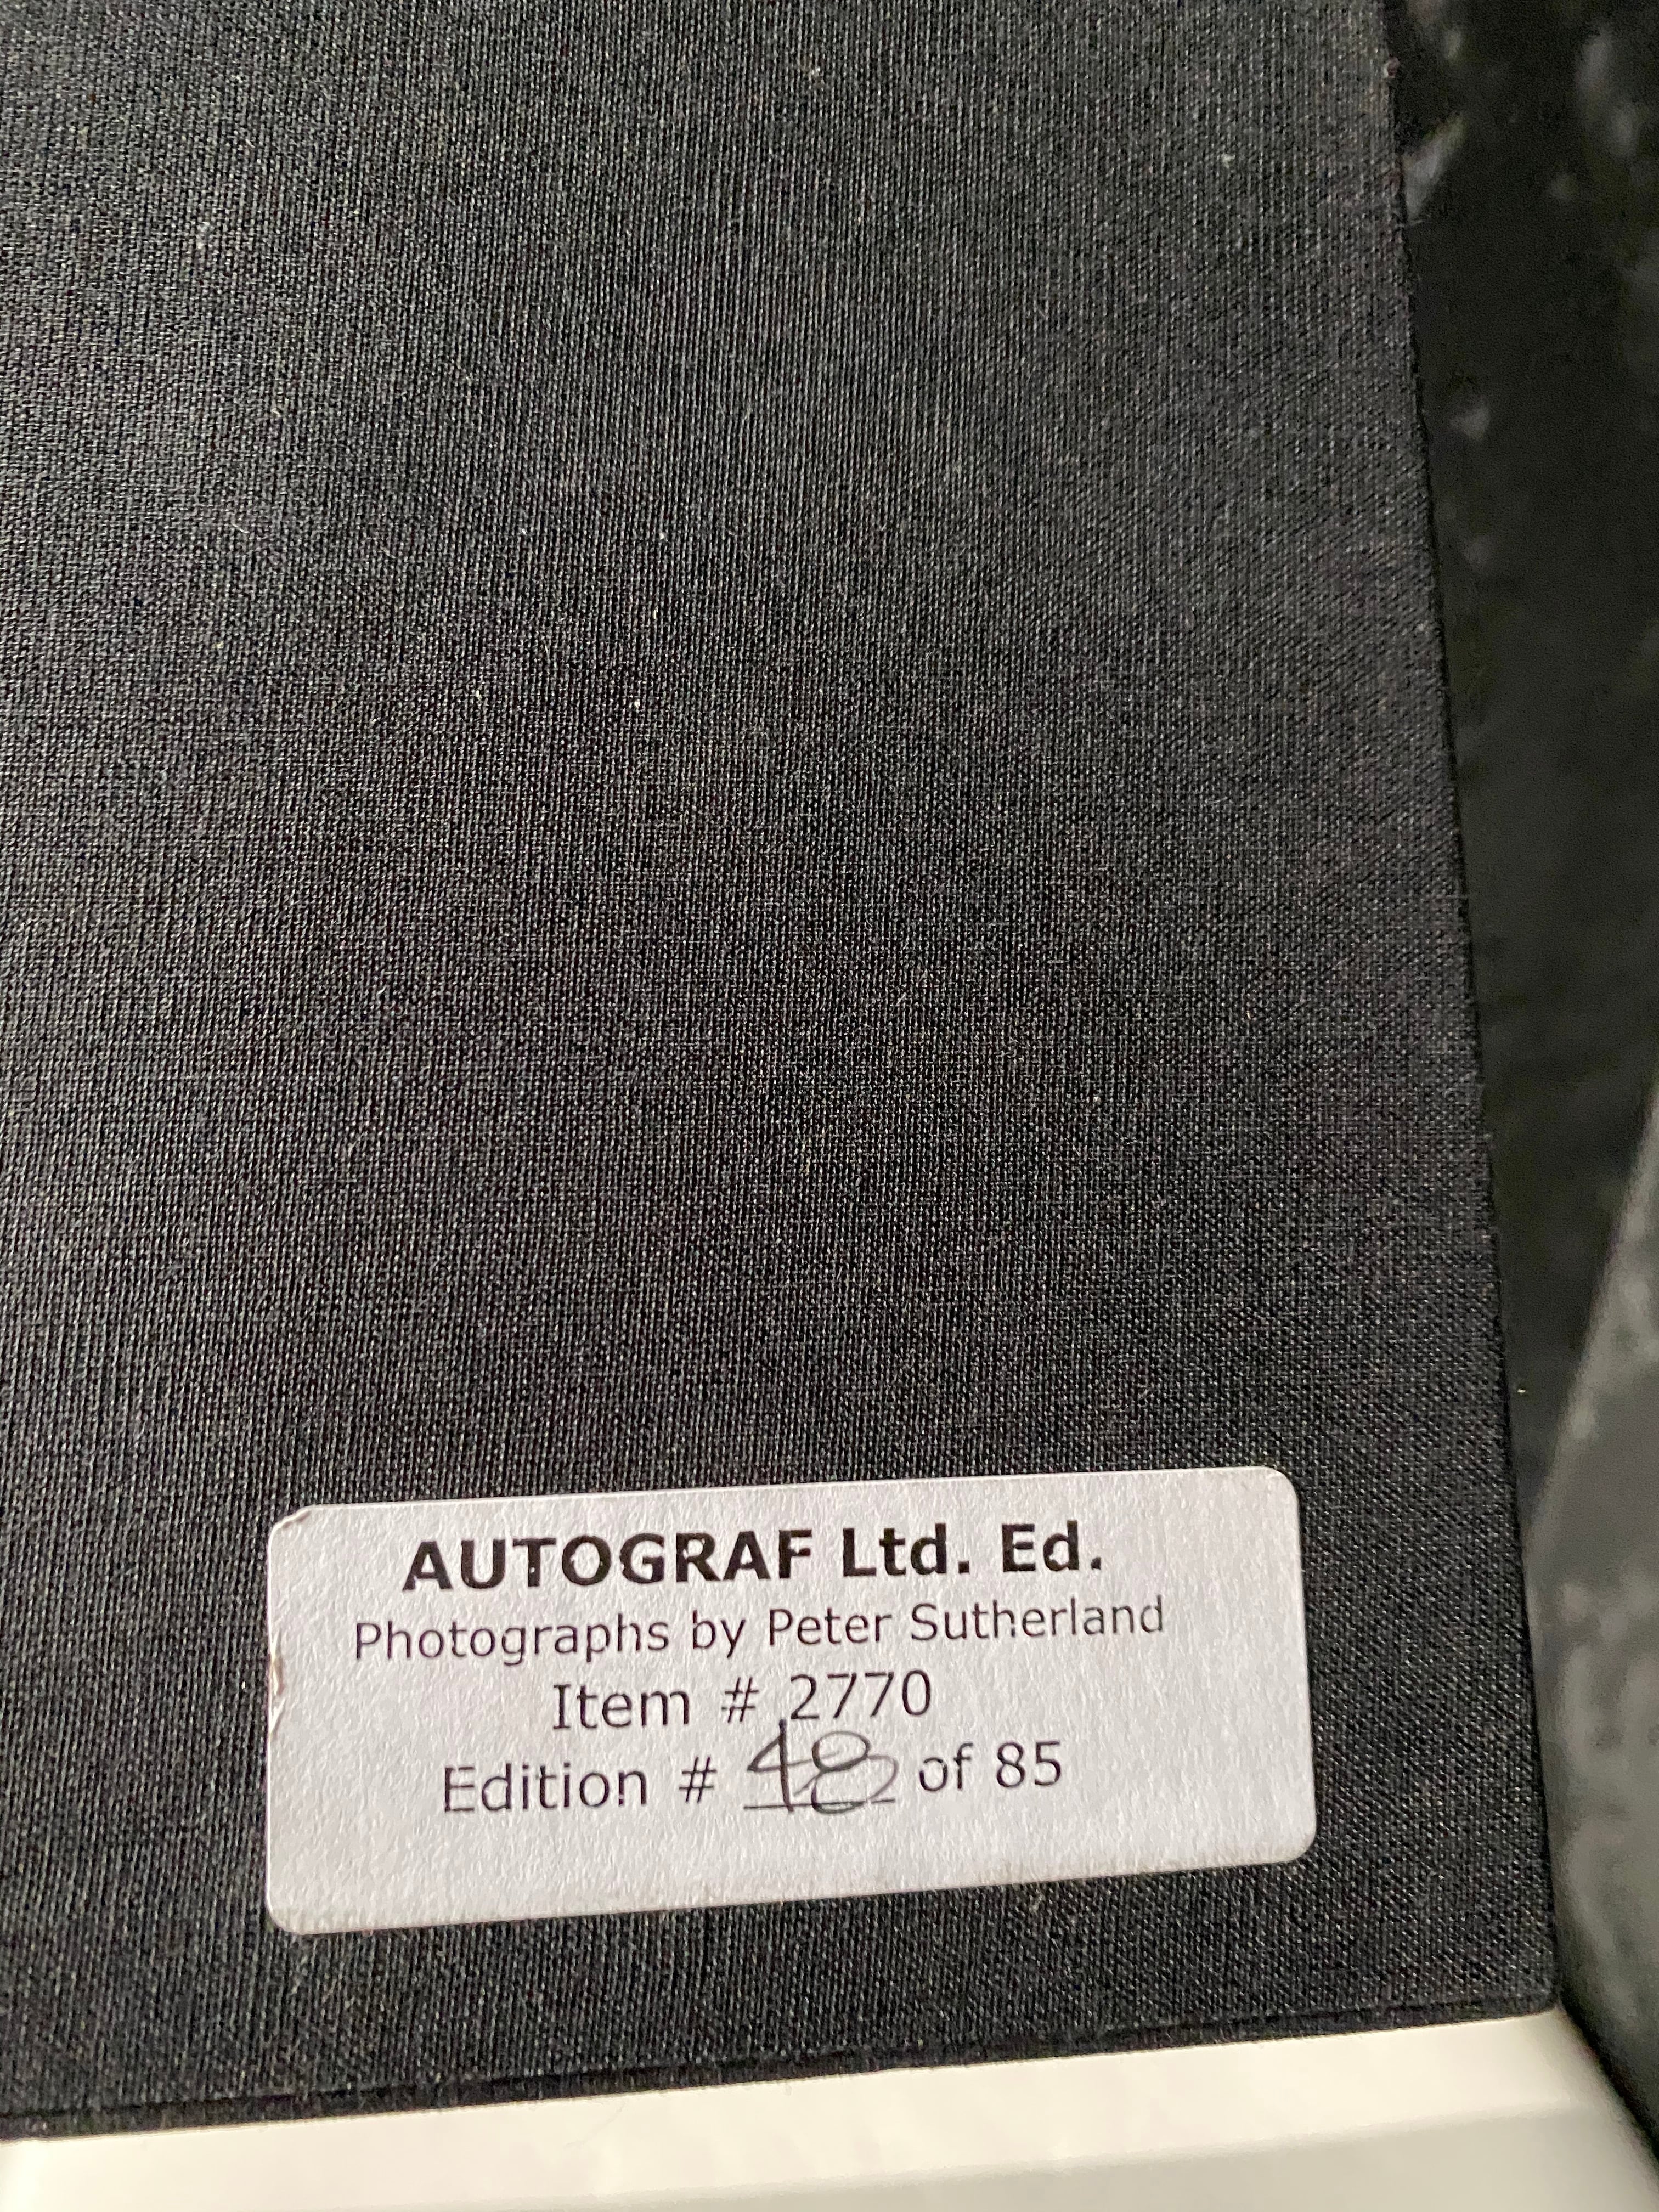 Edition #48/of 85 AUTOGRAF by PETER SUTHERLAND | zbooks powered by BASE